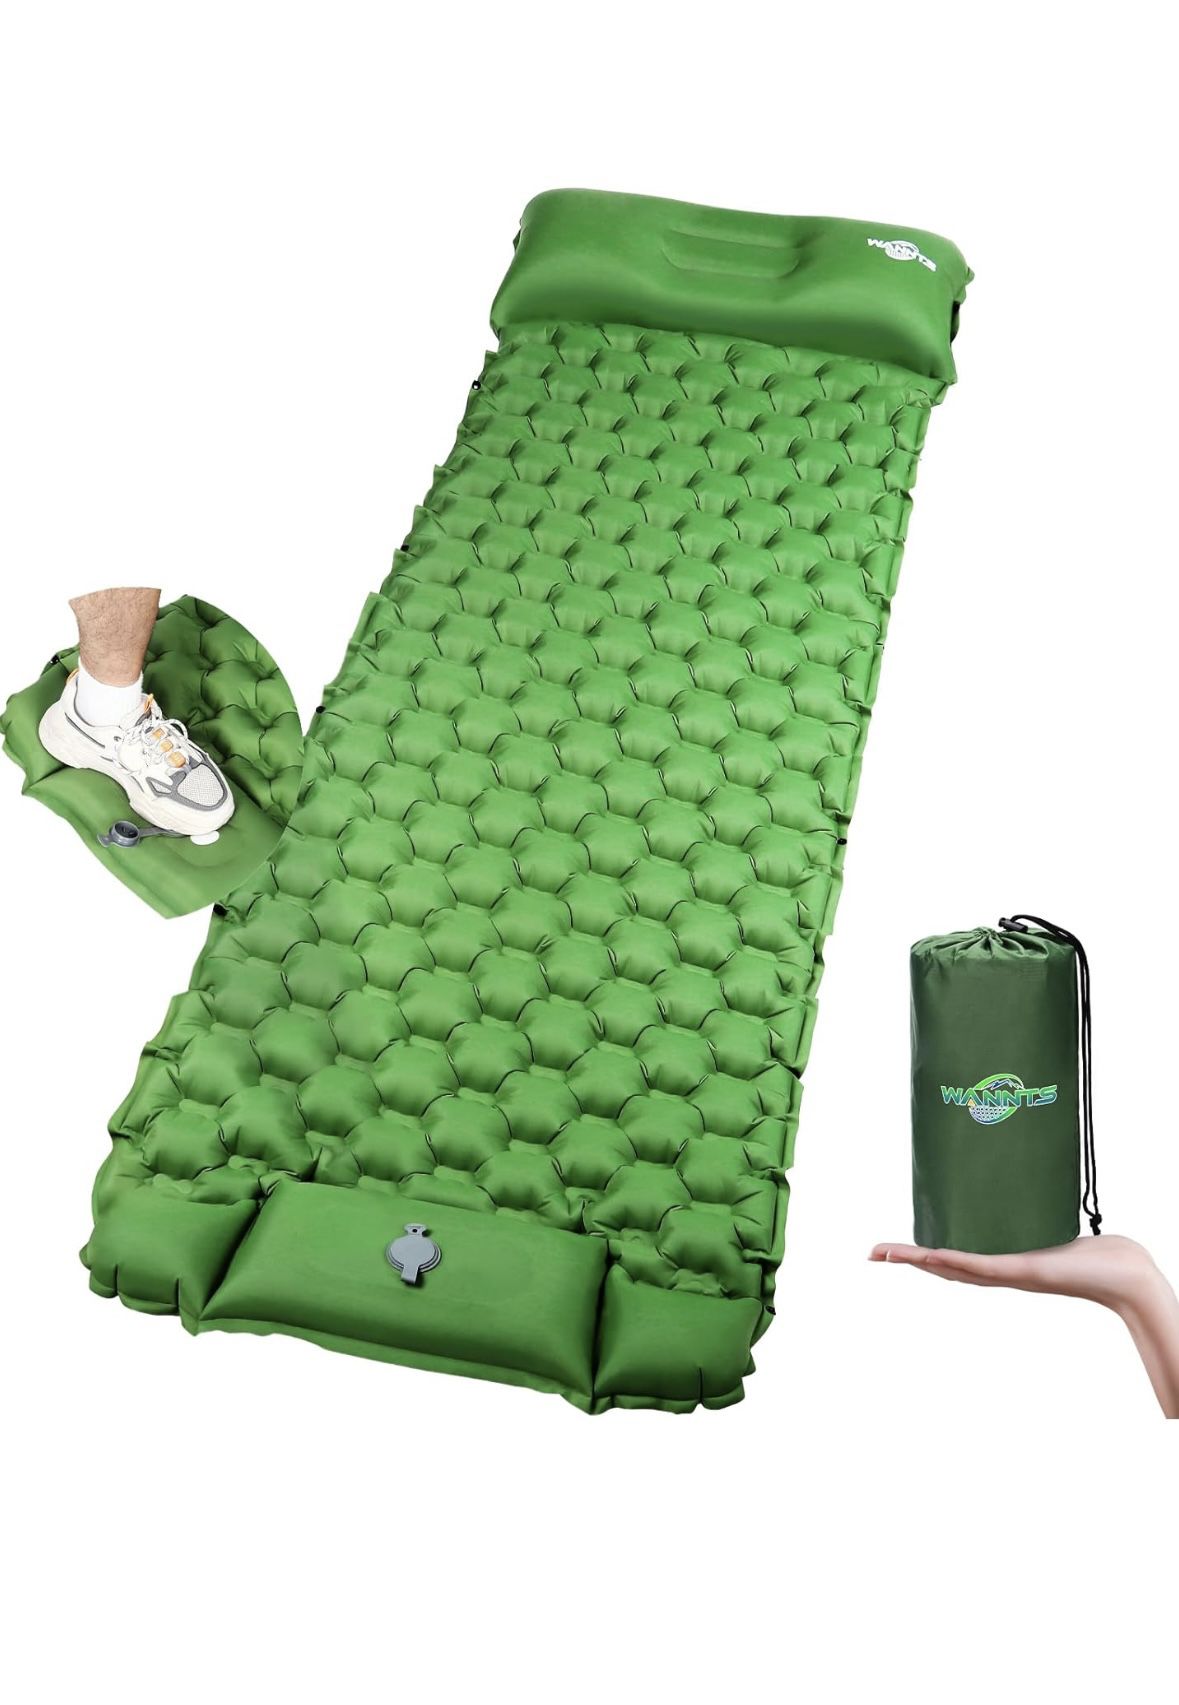 WANNTS Sleepin Pad Ultralight Inflatable Sleeping Pad for Camping, 75''X25'', Built-in Pump, Ultimate for Camping, Hiking - Airpad, Carry Bag, Repair 